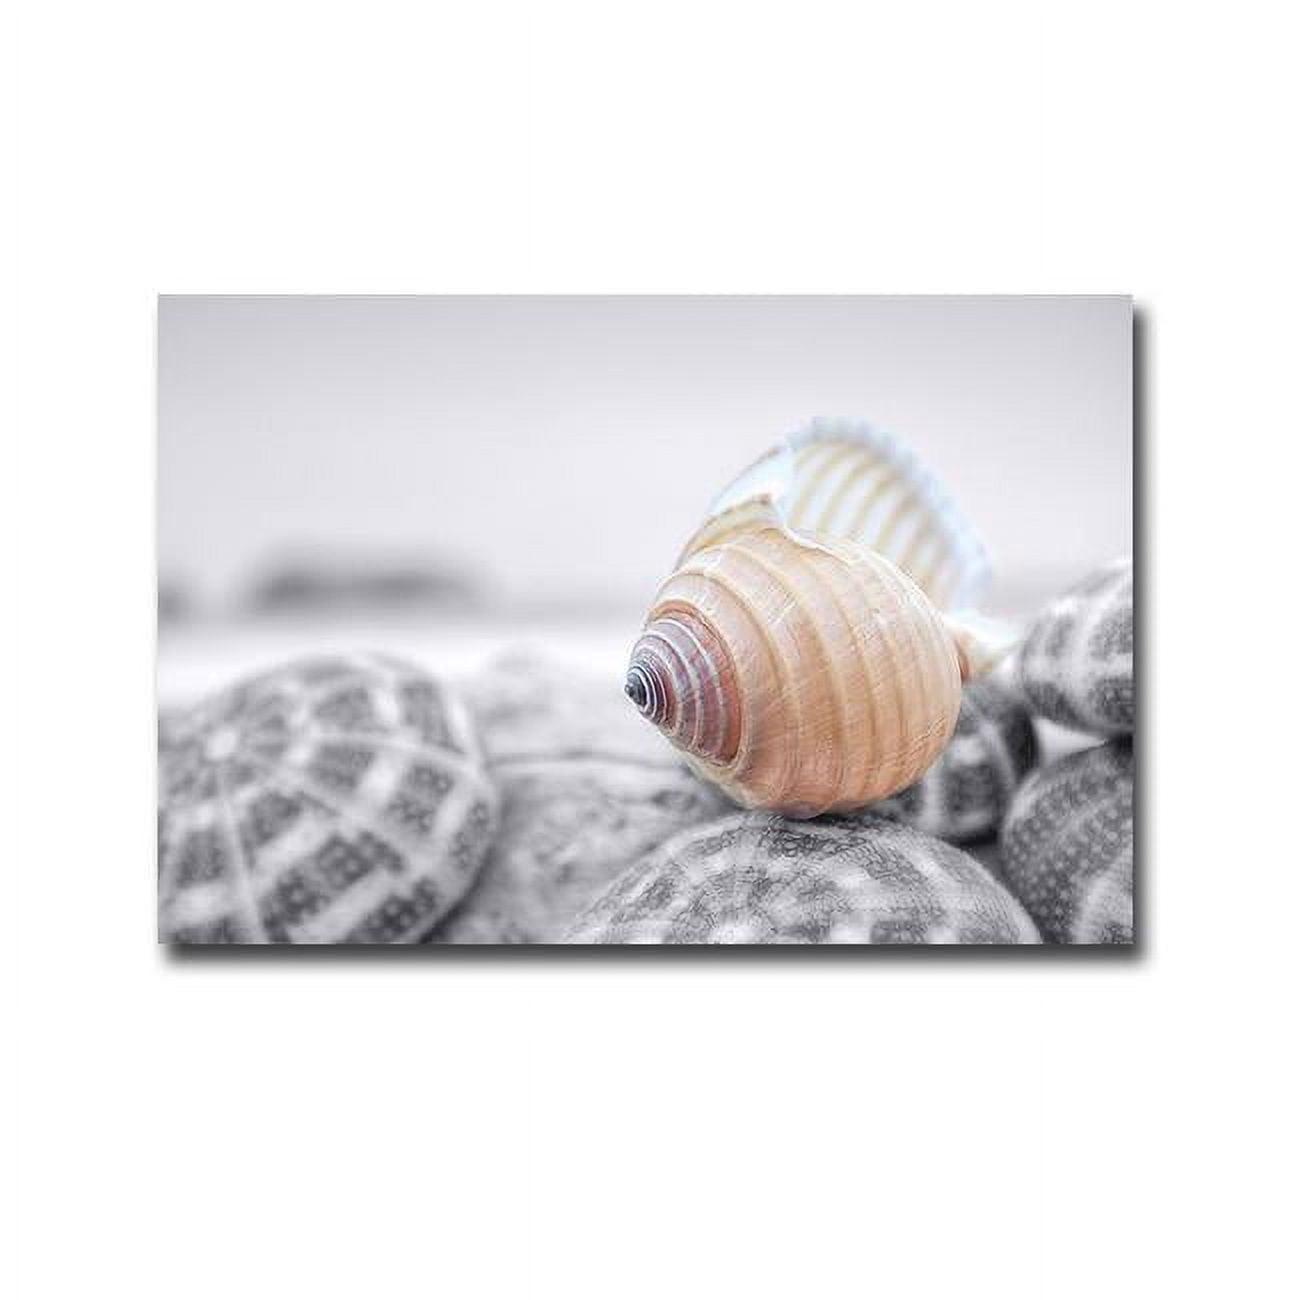 1218e866ig Crescent Beach Shells No.15 By Alan Blaustein Premium Gallery-wrapped Canvas Giclee Art - 12 X 18 X 1.5 In.